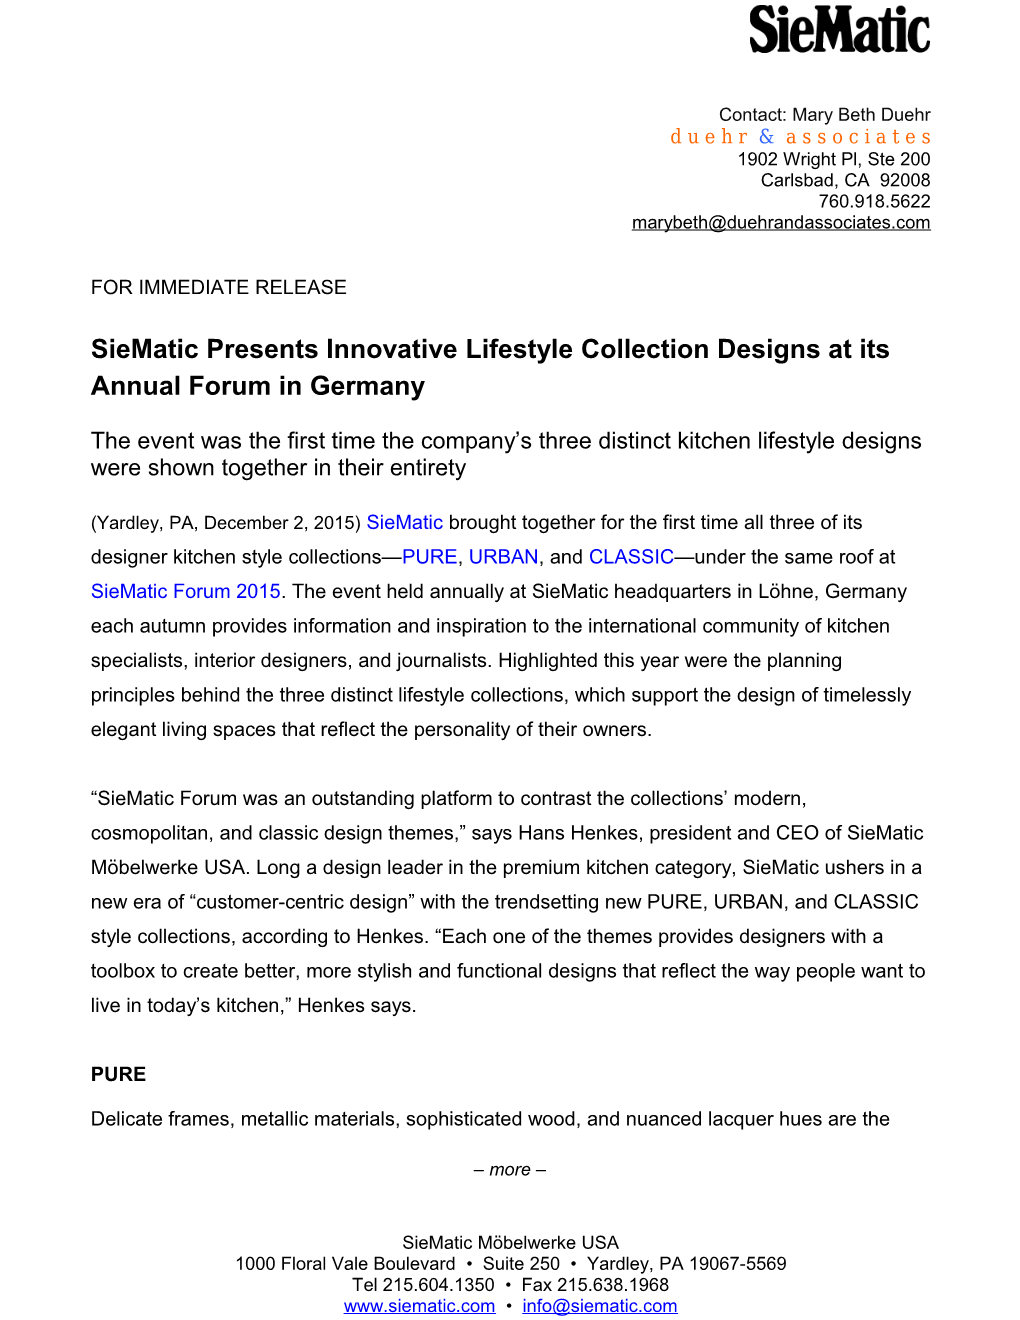 Siematicpresents Innovative Lifestyle Collection Designs at Its Annual Forum in Germany